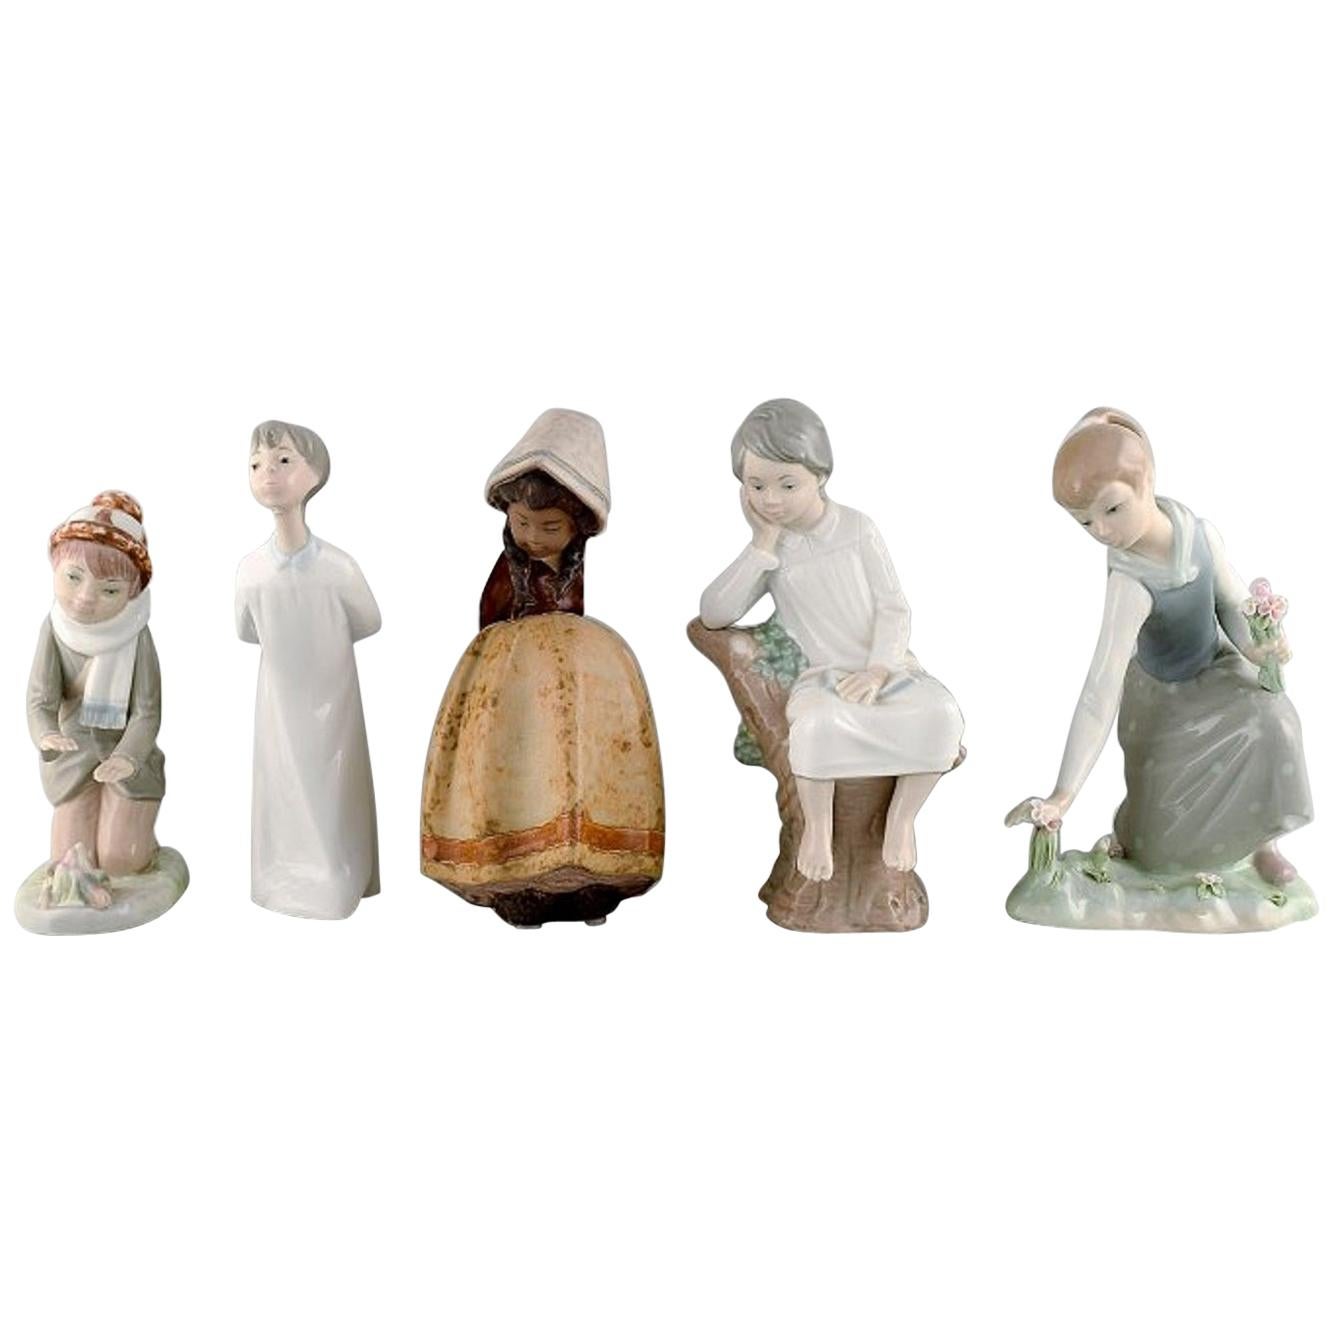 Lladro, Nao and Zaphir, Spain, Five Porcelain Figurines of Children, 1980s-1990s For Sale